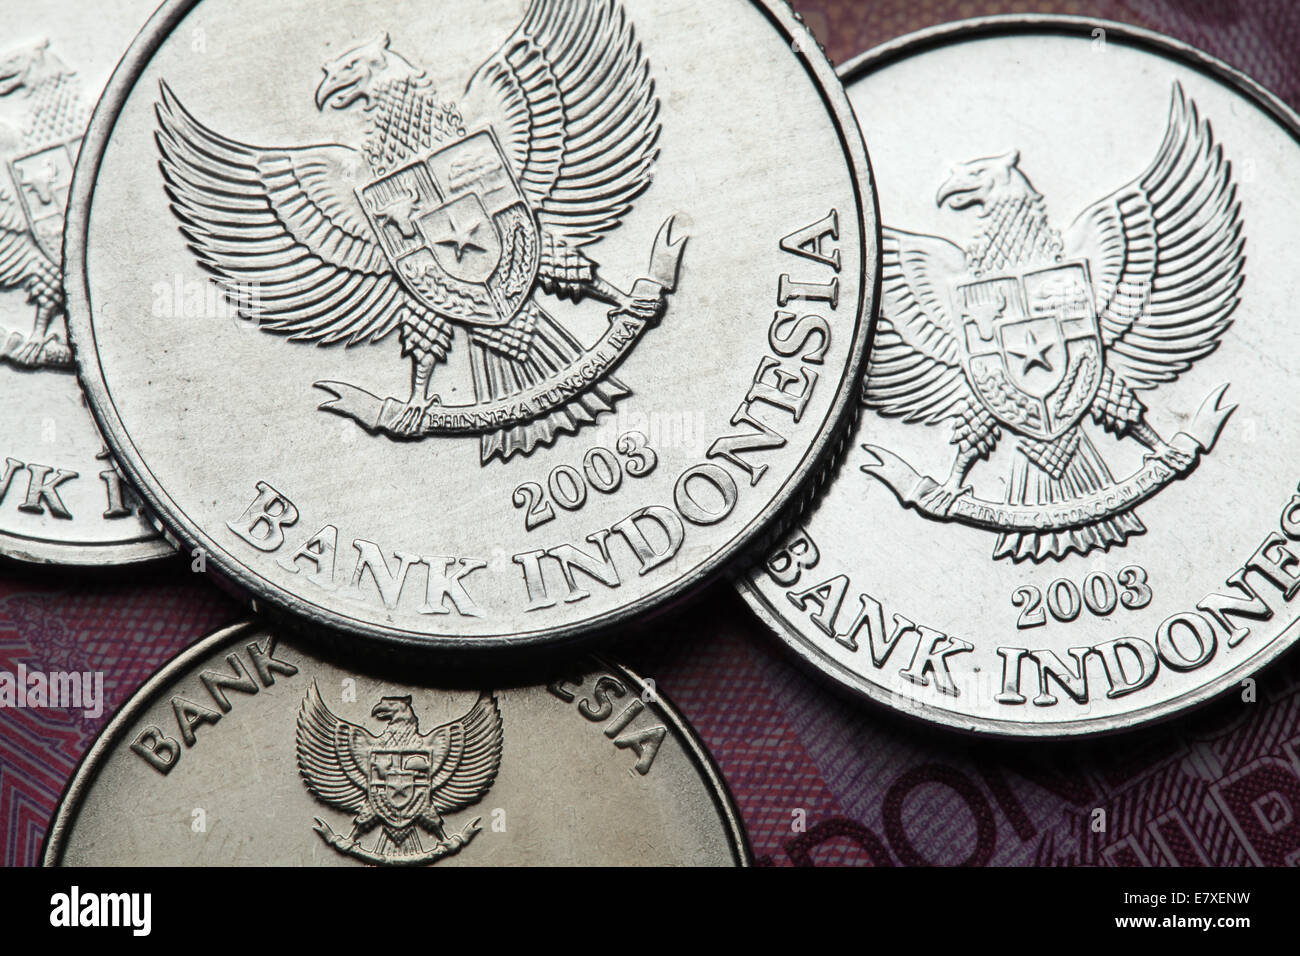 Coins of Indonesia. National emblem of Indonesia called the Garuda Pancasila depicted in Indonesian rupiah coins. Stock Photo